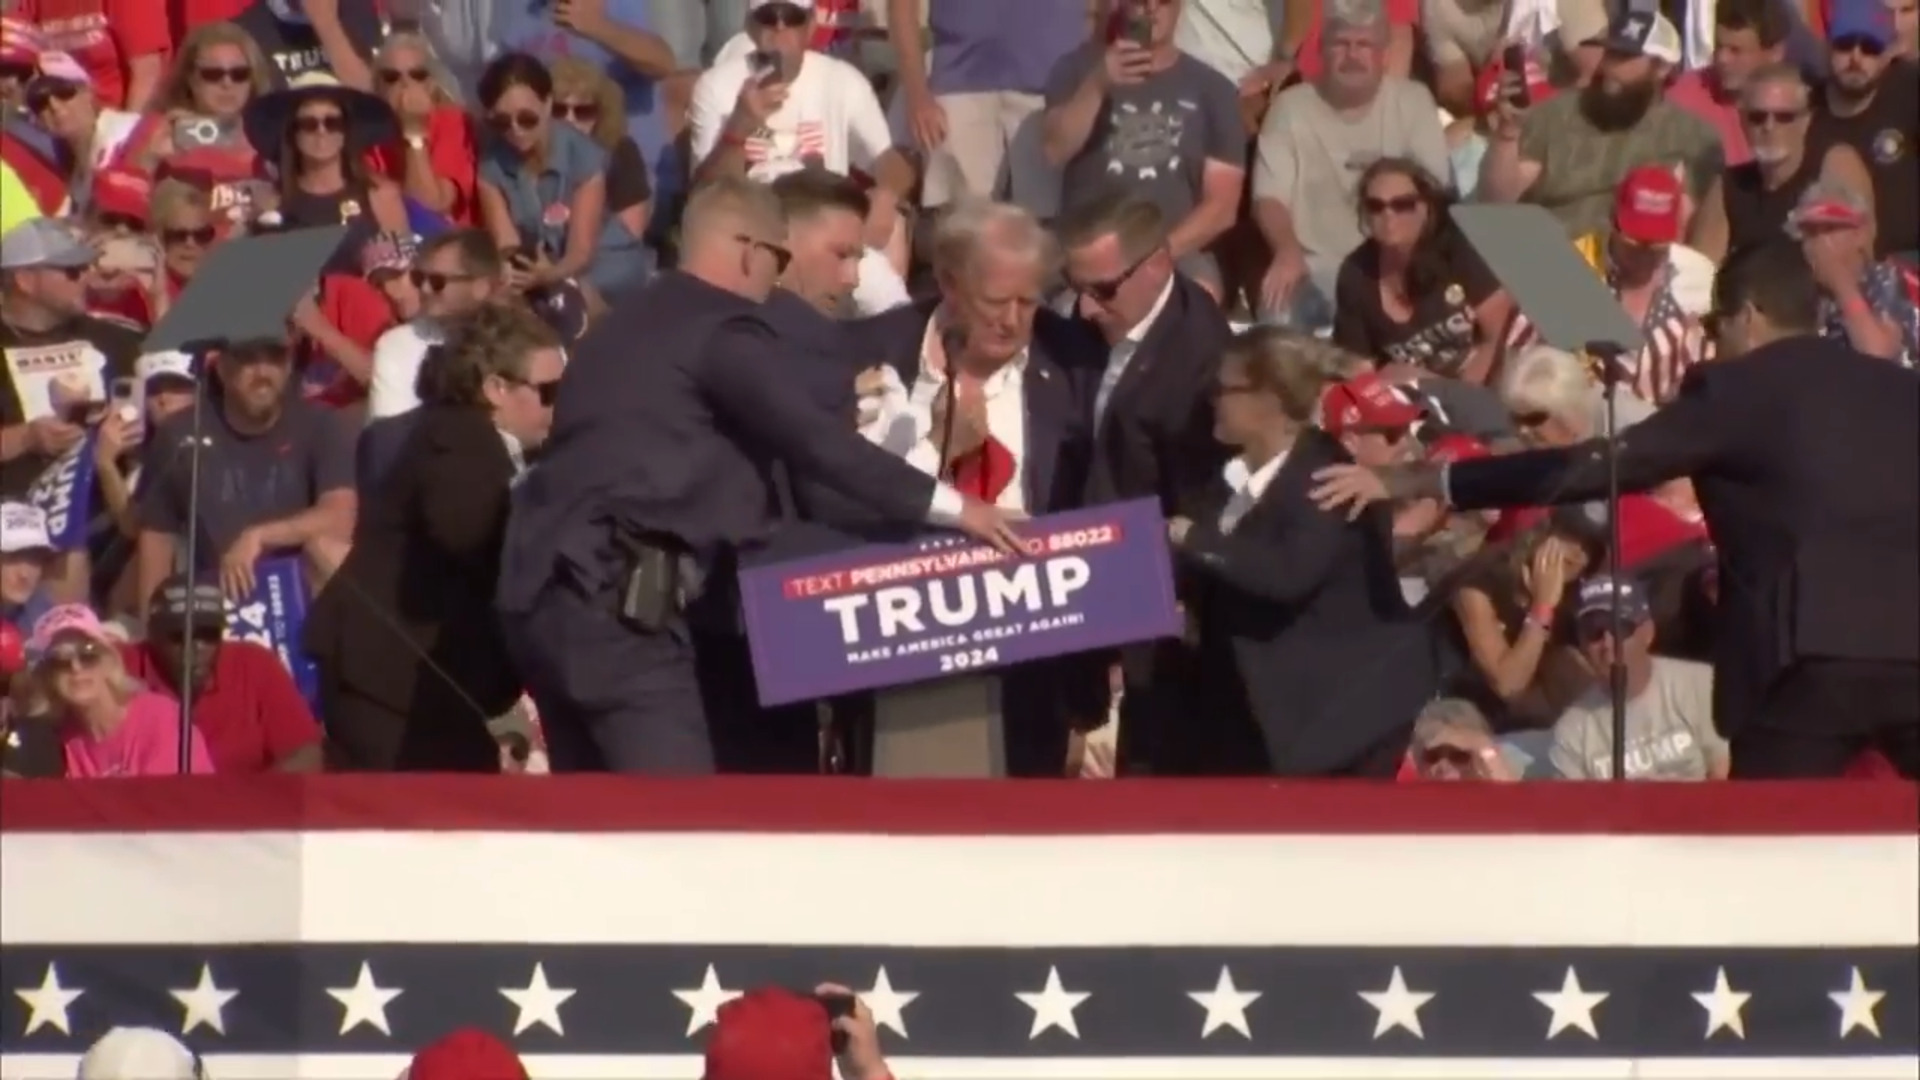 RAW: U.S. Secret Service escorts Donald Trump off stage after shots fired at rally